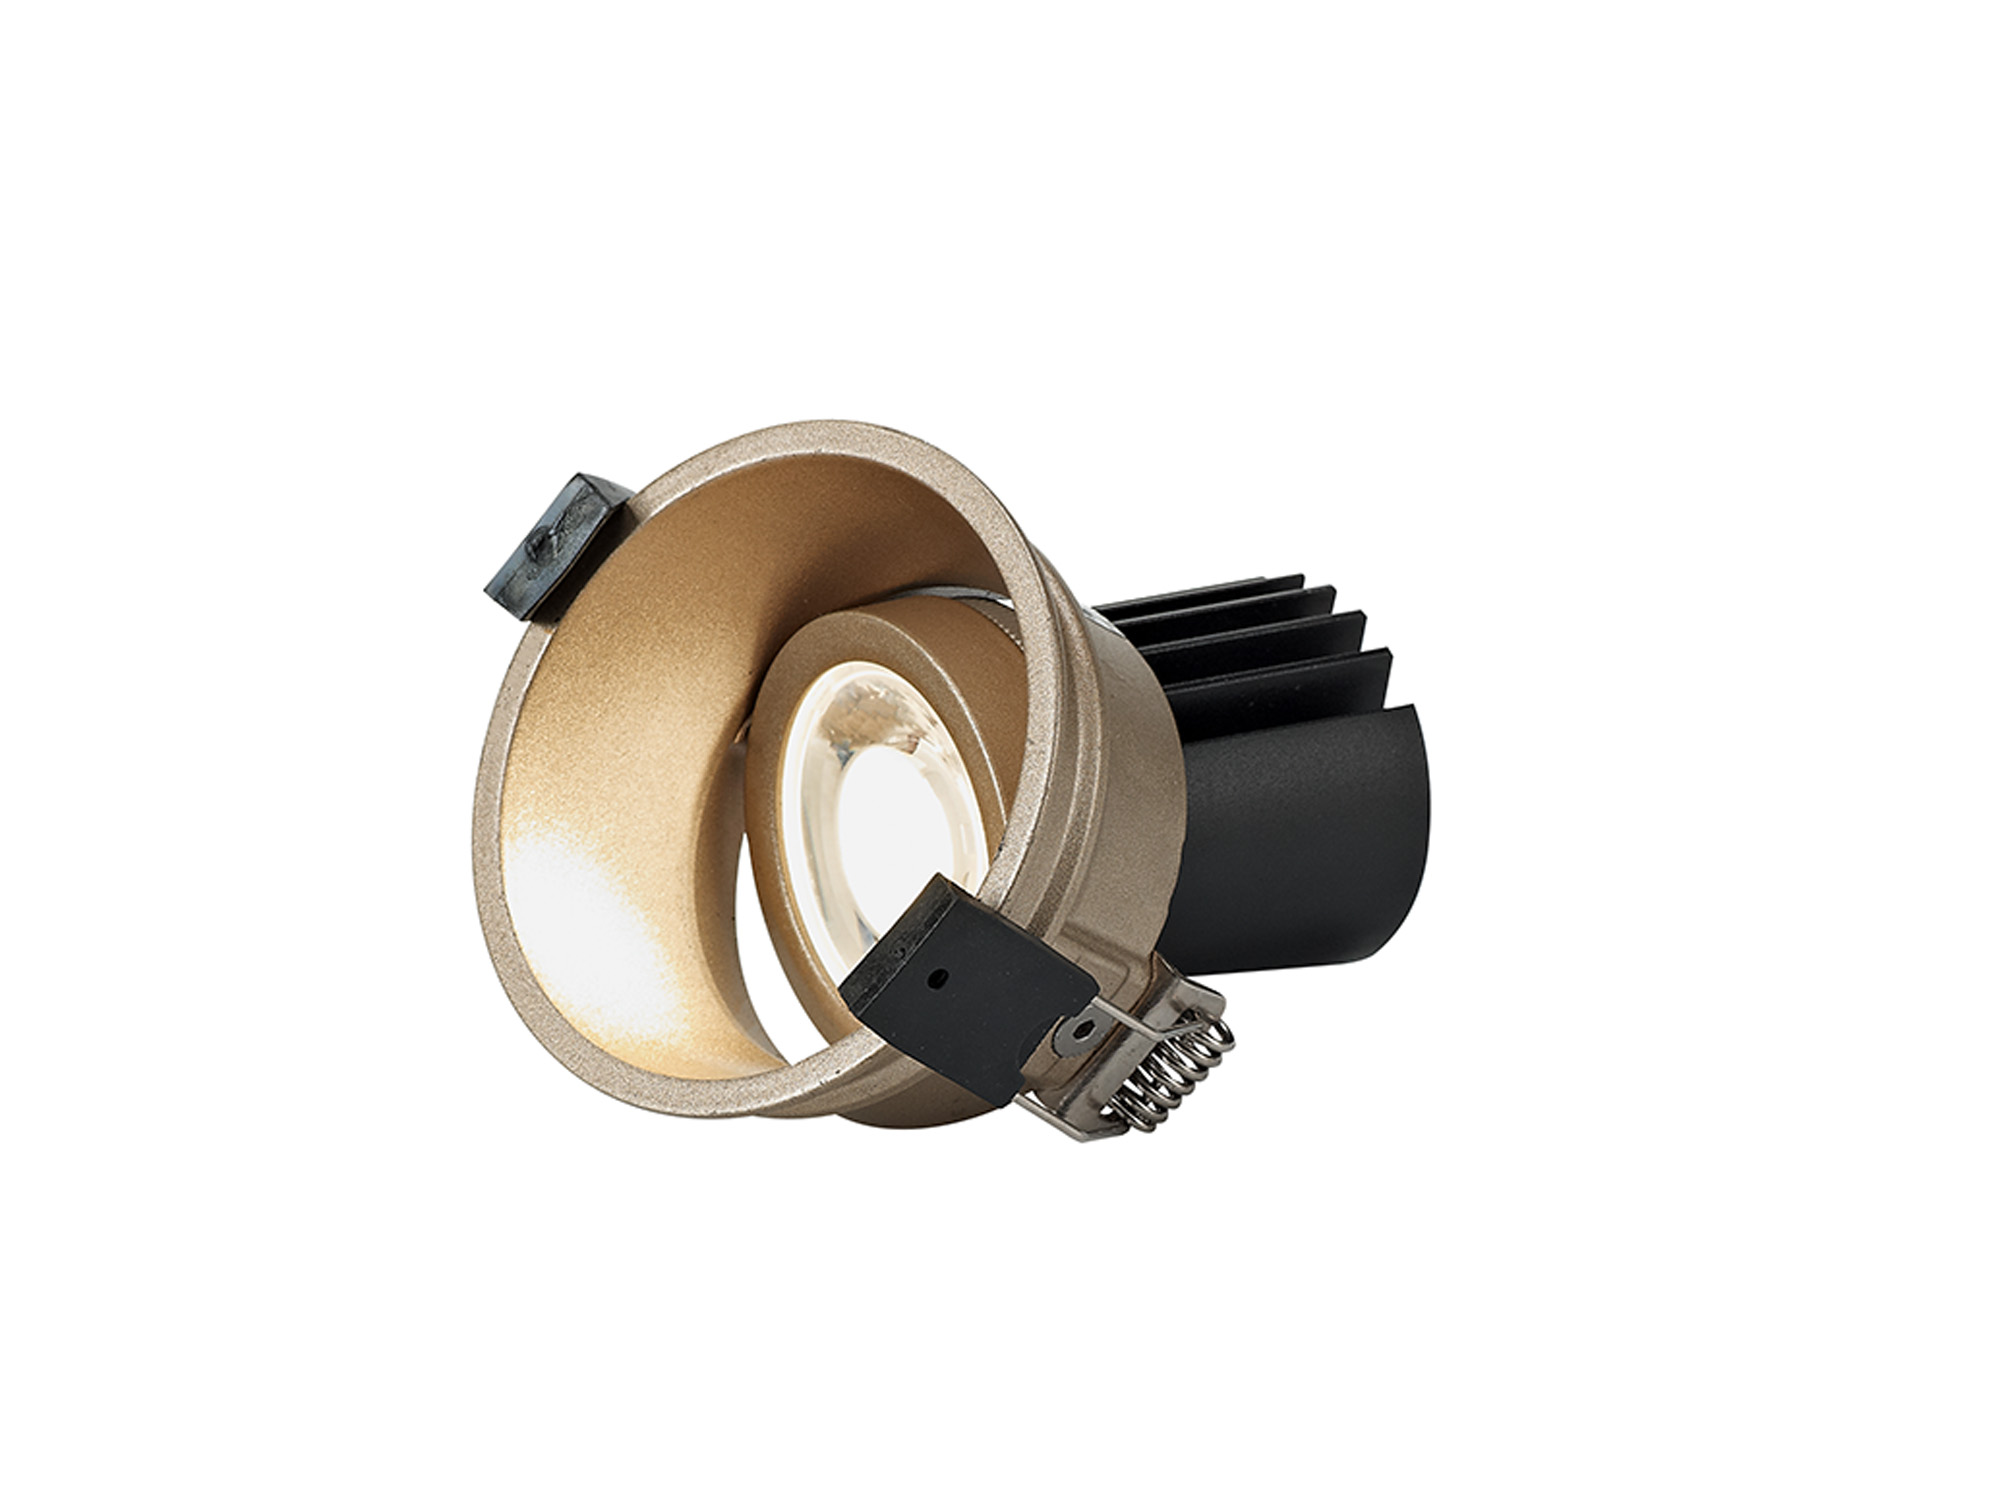 DM201676  Bania A 9 Powered by Tridonic  9W 2700K 770lm 24° CRI>90 LED Engine; 250mA Gold Adjustable Recessed Spotlight; IP20